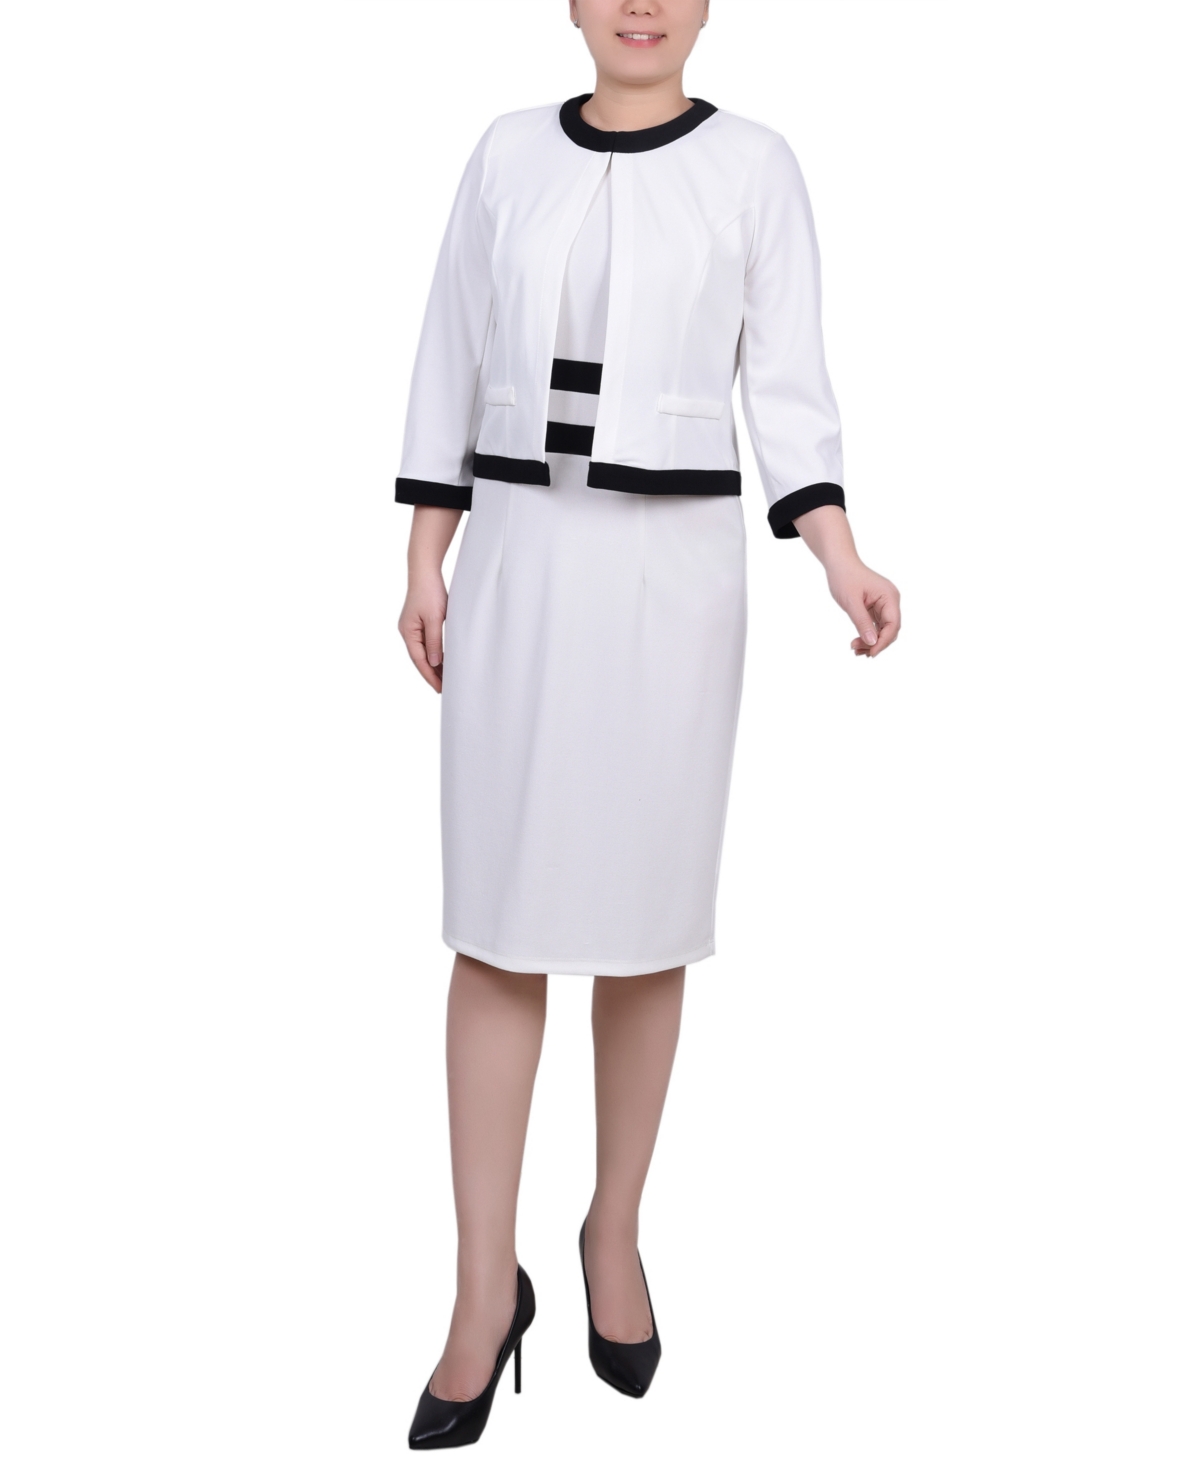 Ny Collection Plus Size Elbow Sleeve Colorblocked Dress, 2 Piece Set In White,black